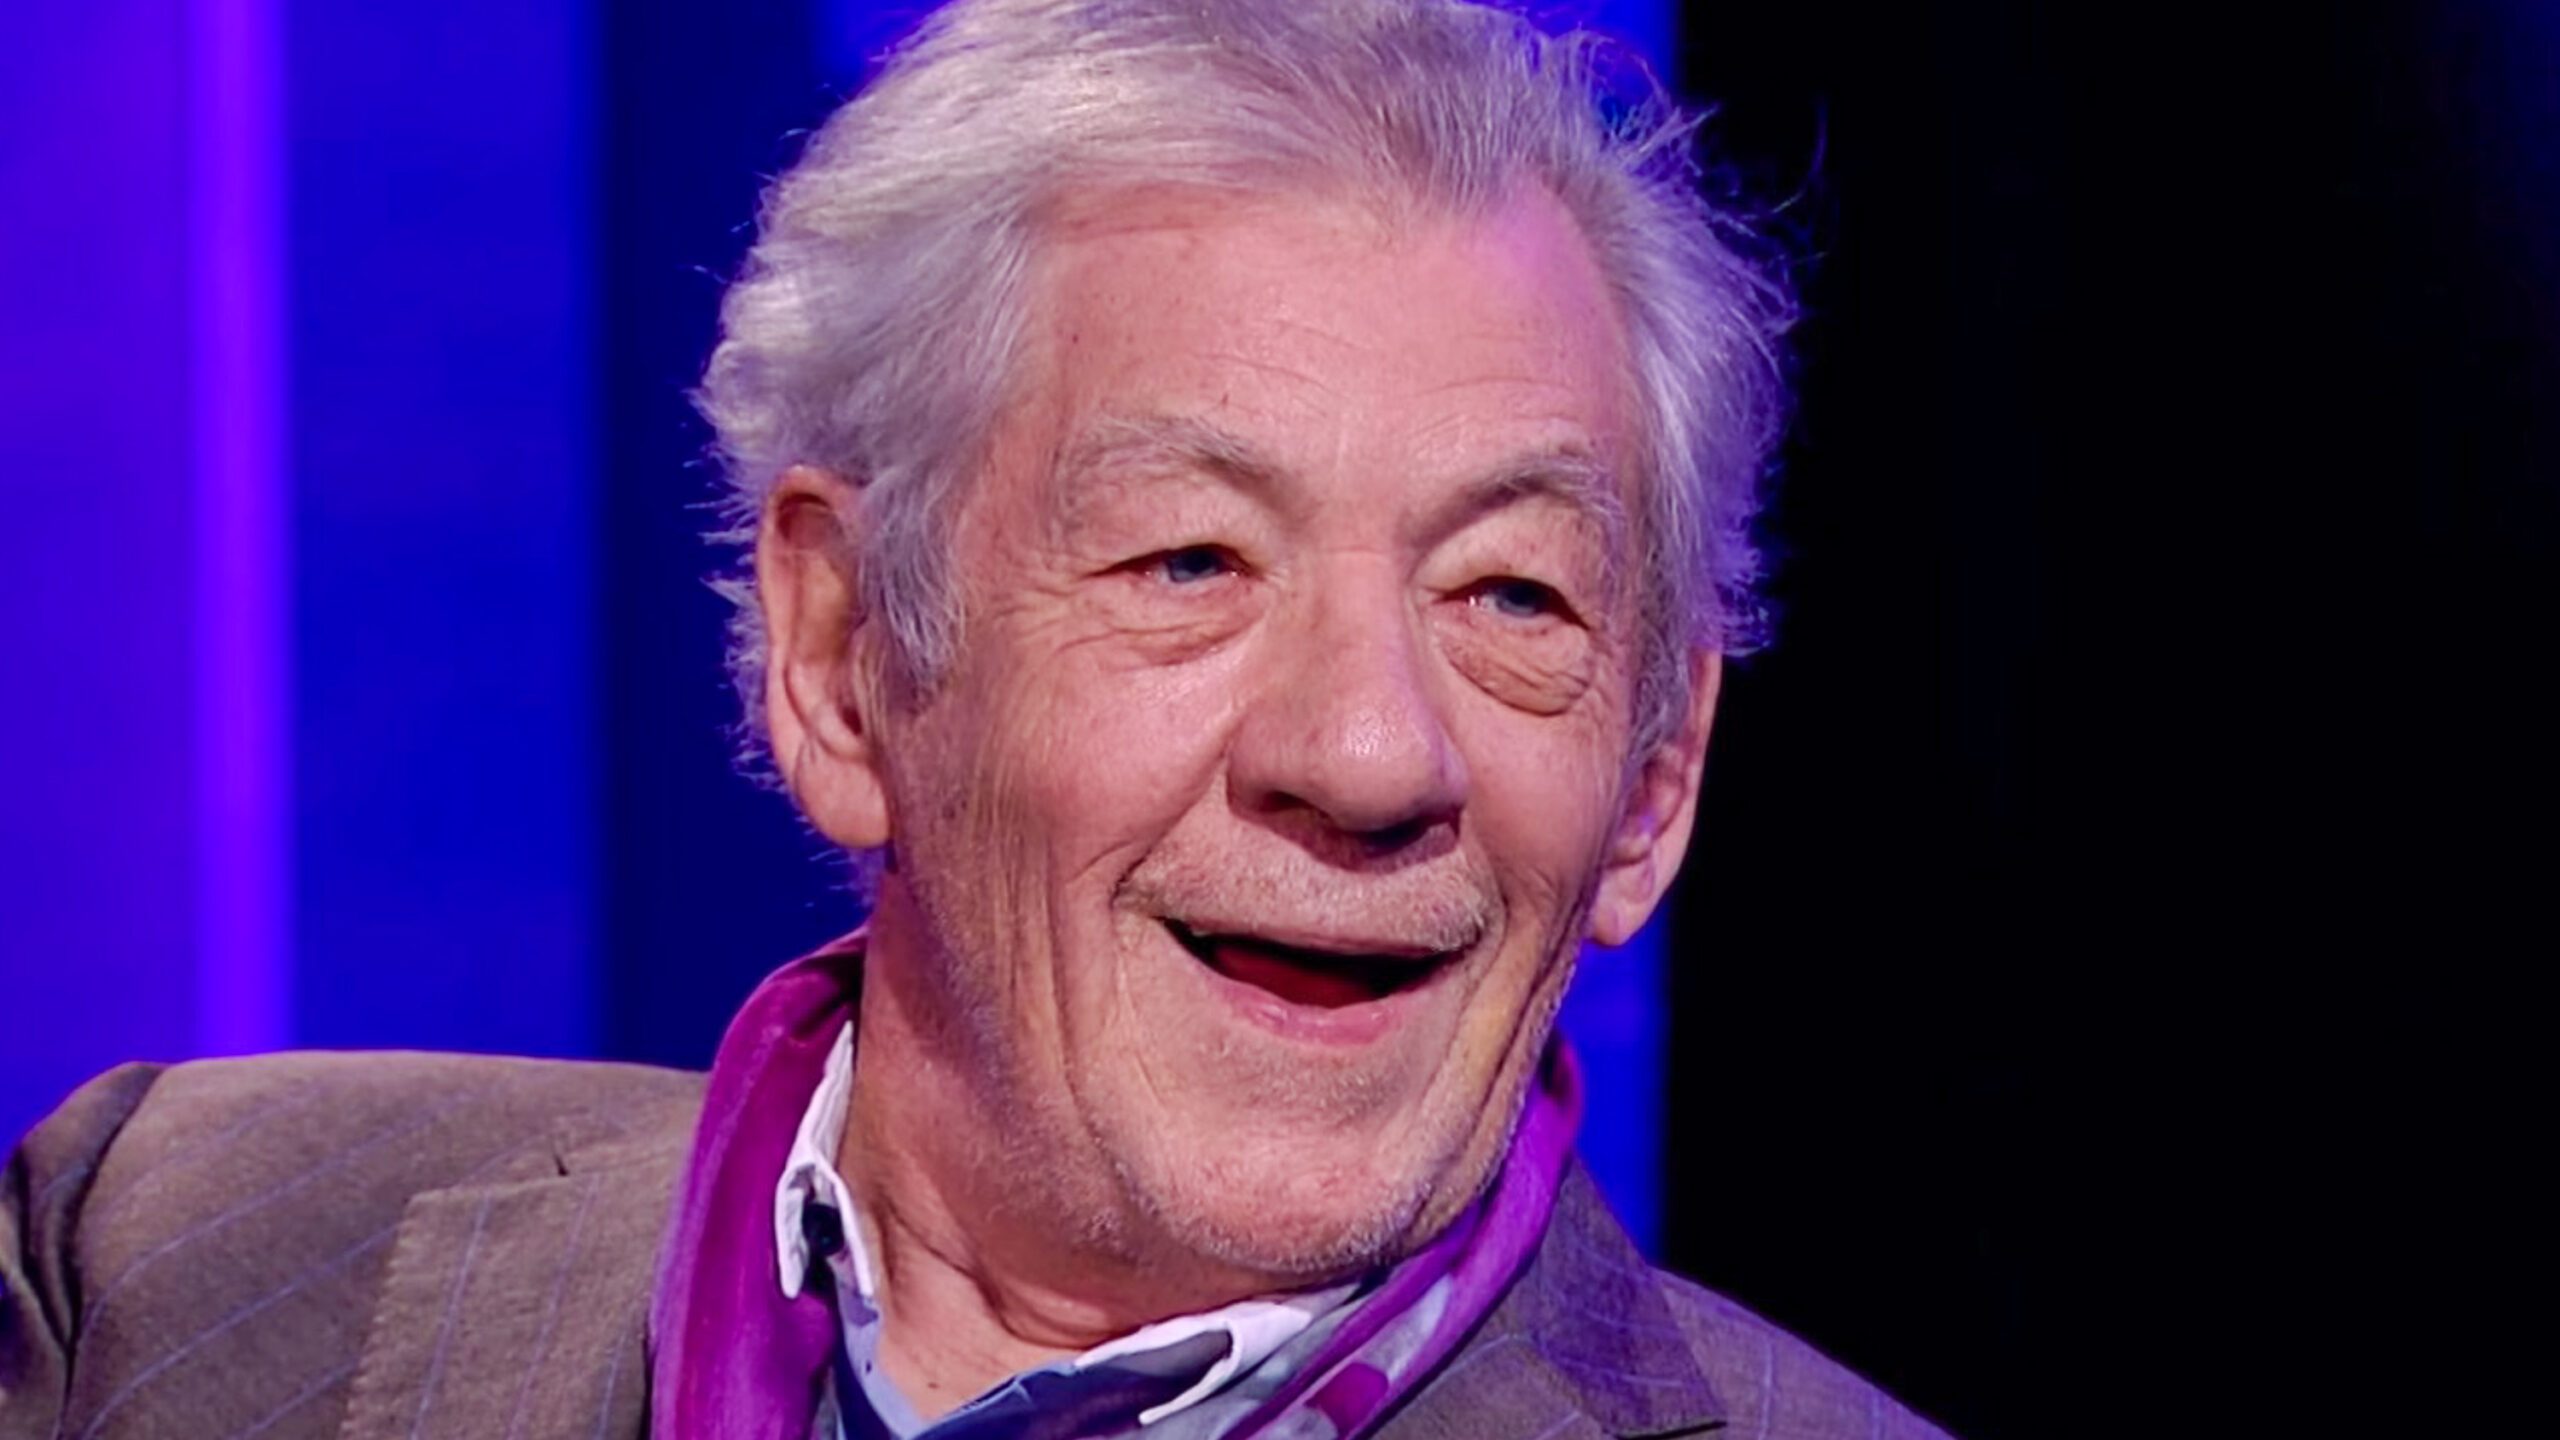 WATCH: Here’s why Ian McKellen turned down Dumbledore role